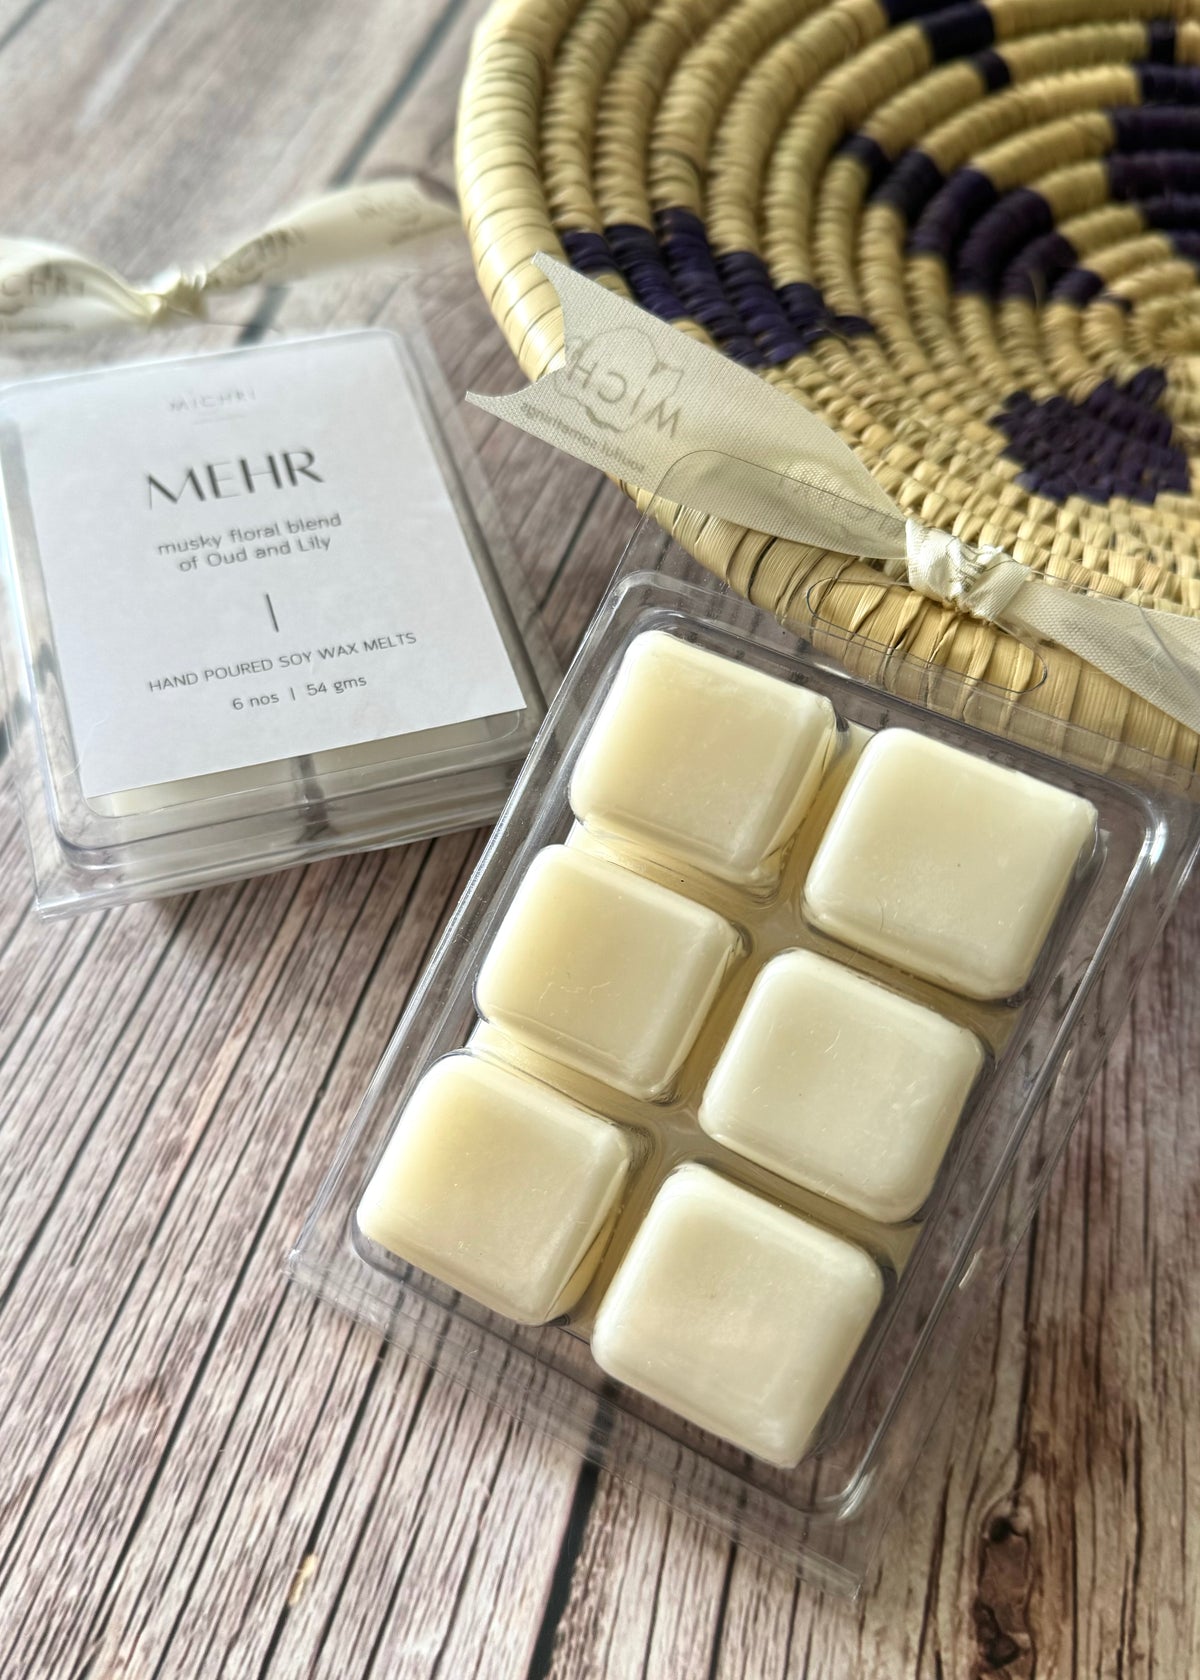 Mehr Wax Melt - Oud And Lilly